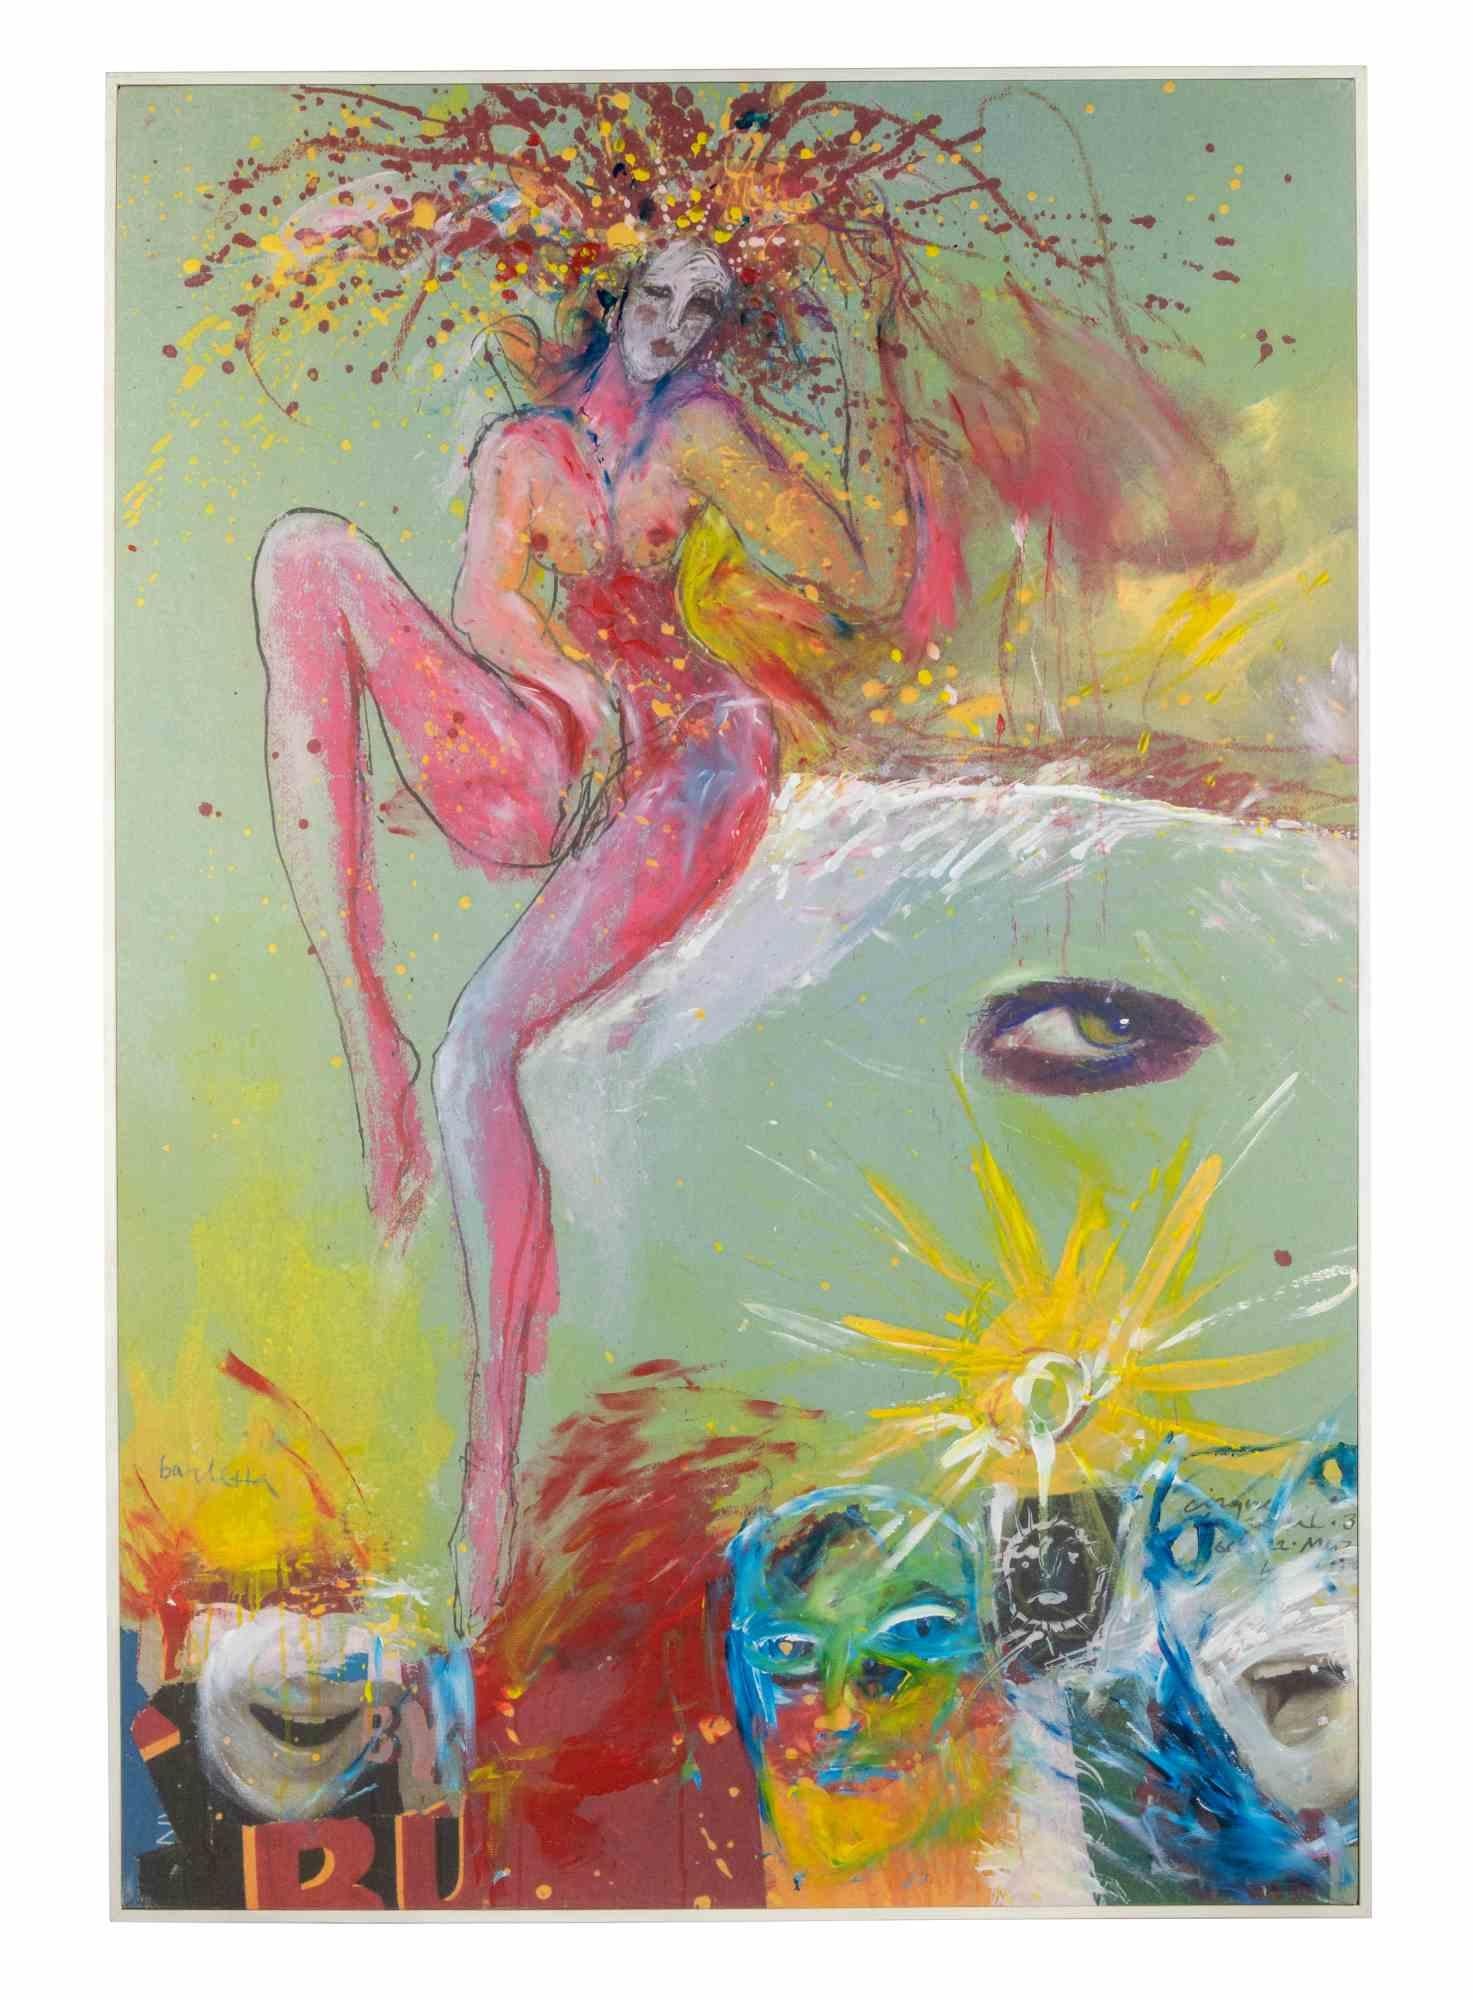 Cirque du Soleil n.34 is a contemporary artwork realized by Sergio Barletta in 1990s.

Hand Signed on the lower margin.

Mixed media and collage on canvas.

Includes frame: 142 x 97 cm